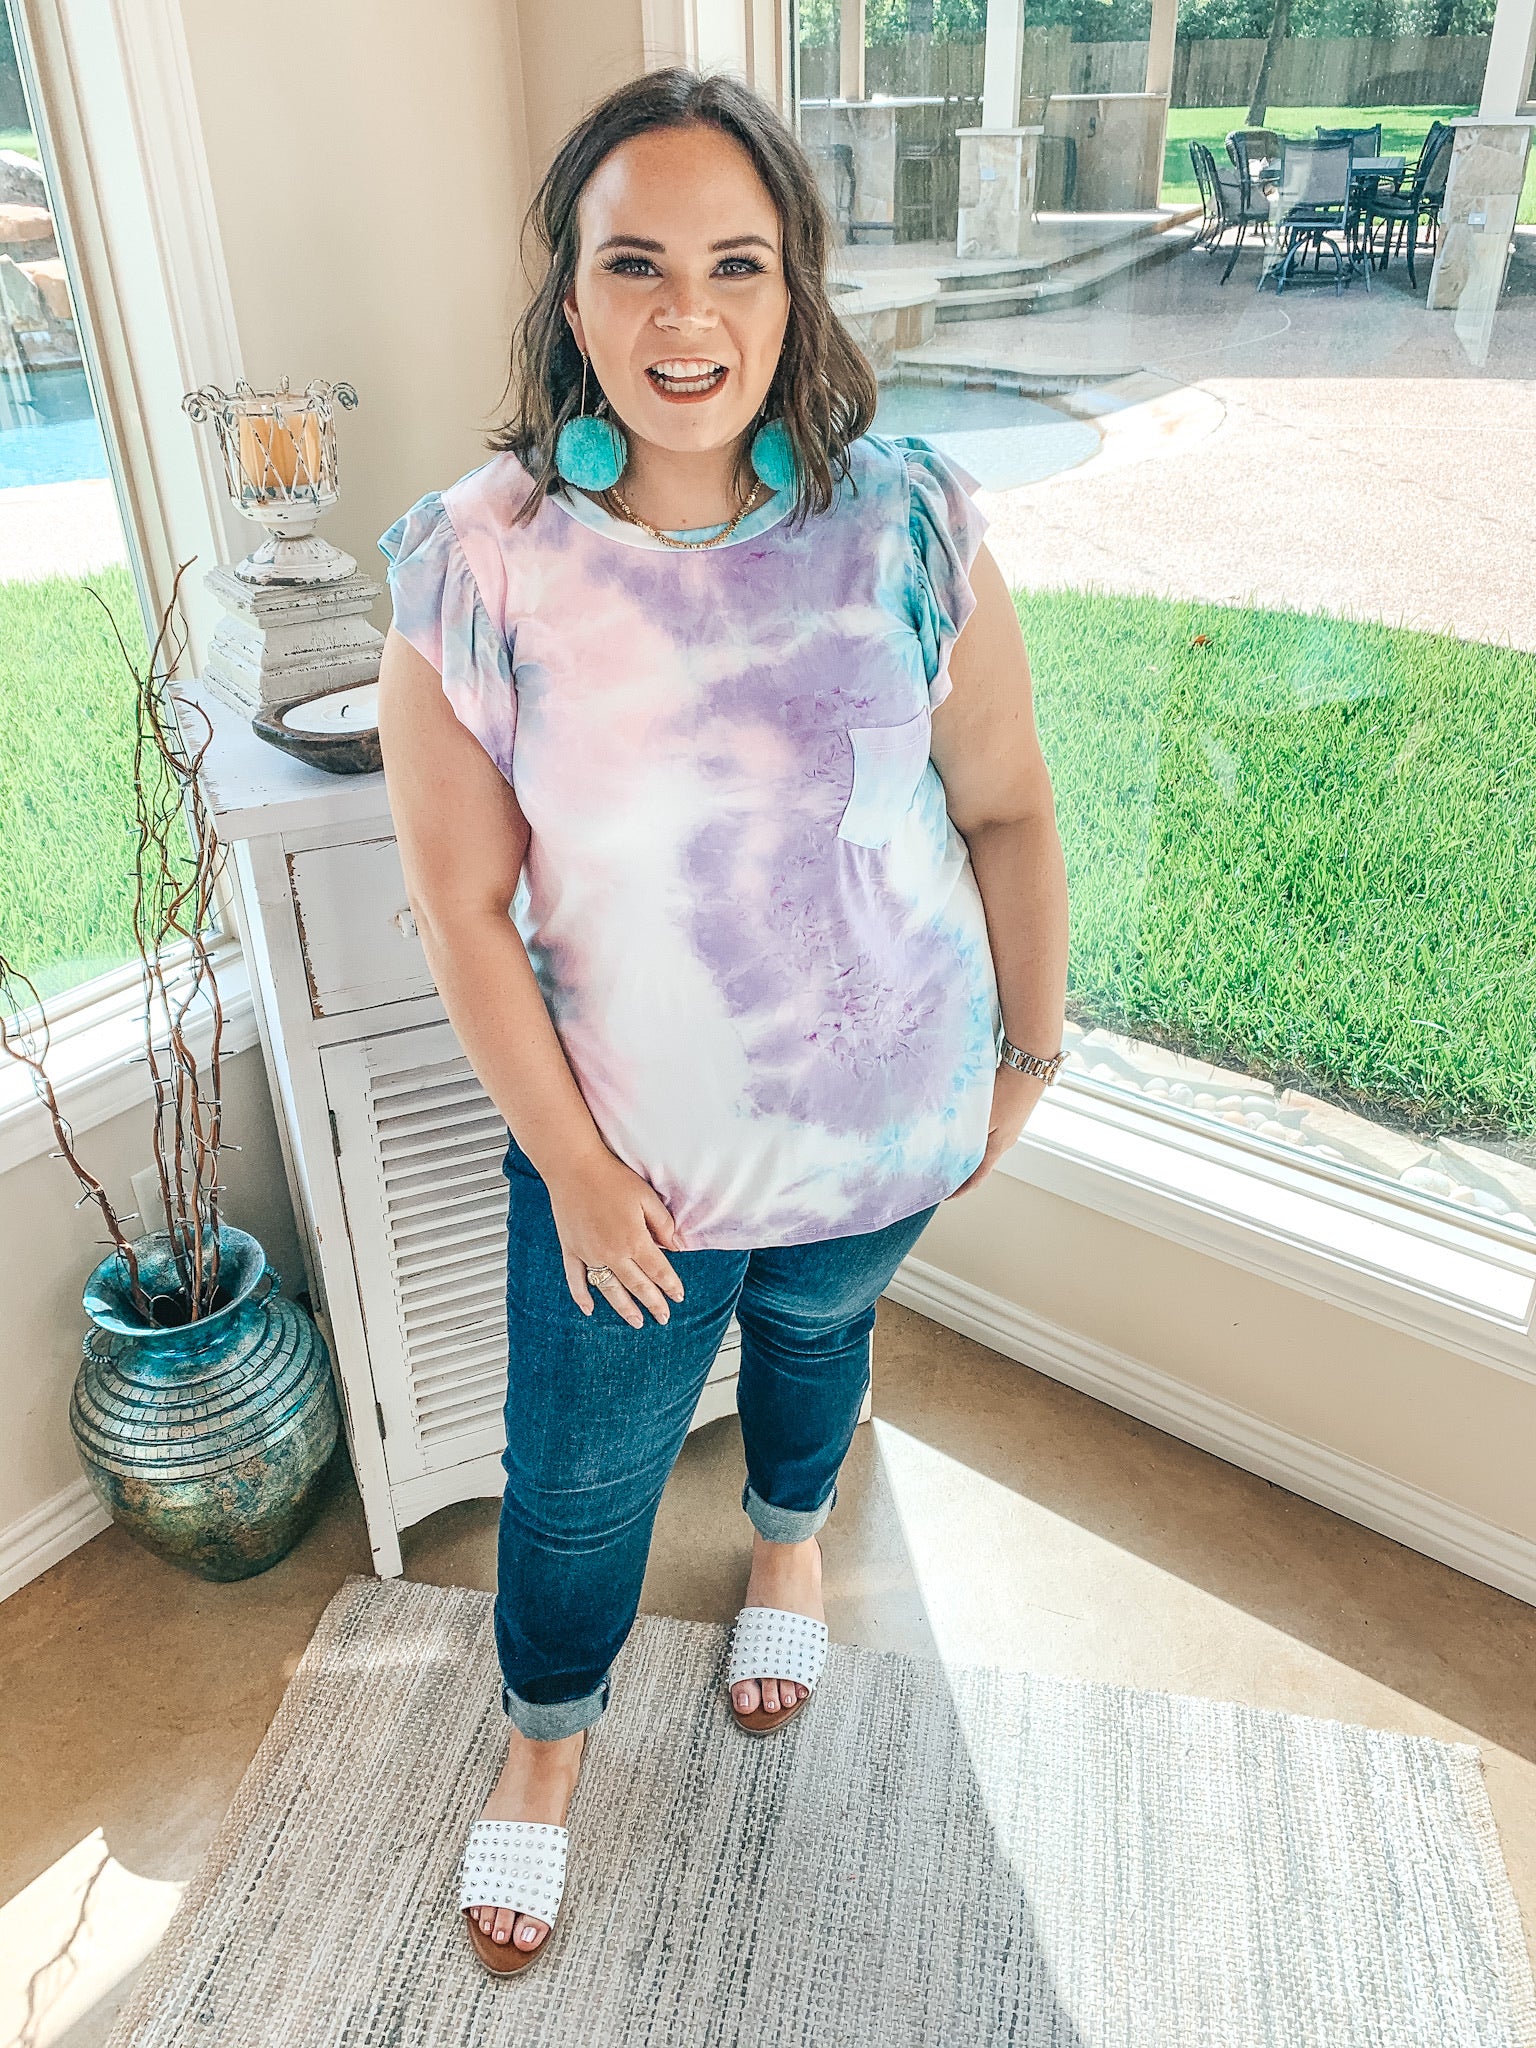 Last Chance Size Small & 3XL | Makes My Heart Flutter Tie Dye Top With Flutter Sleeves in Turquoise and Purple - Giddy Up Glamour Boutique